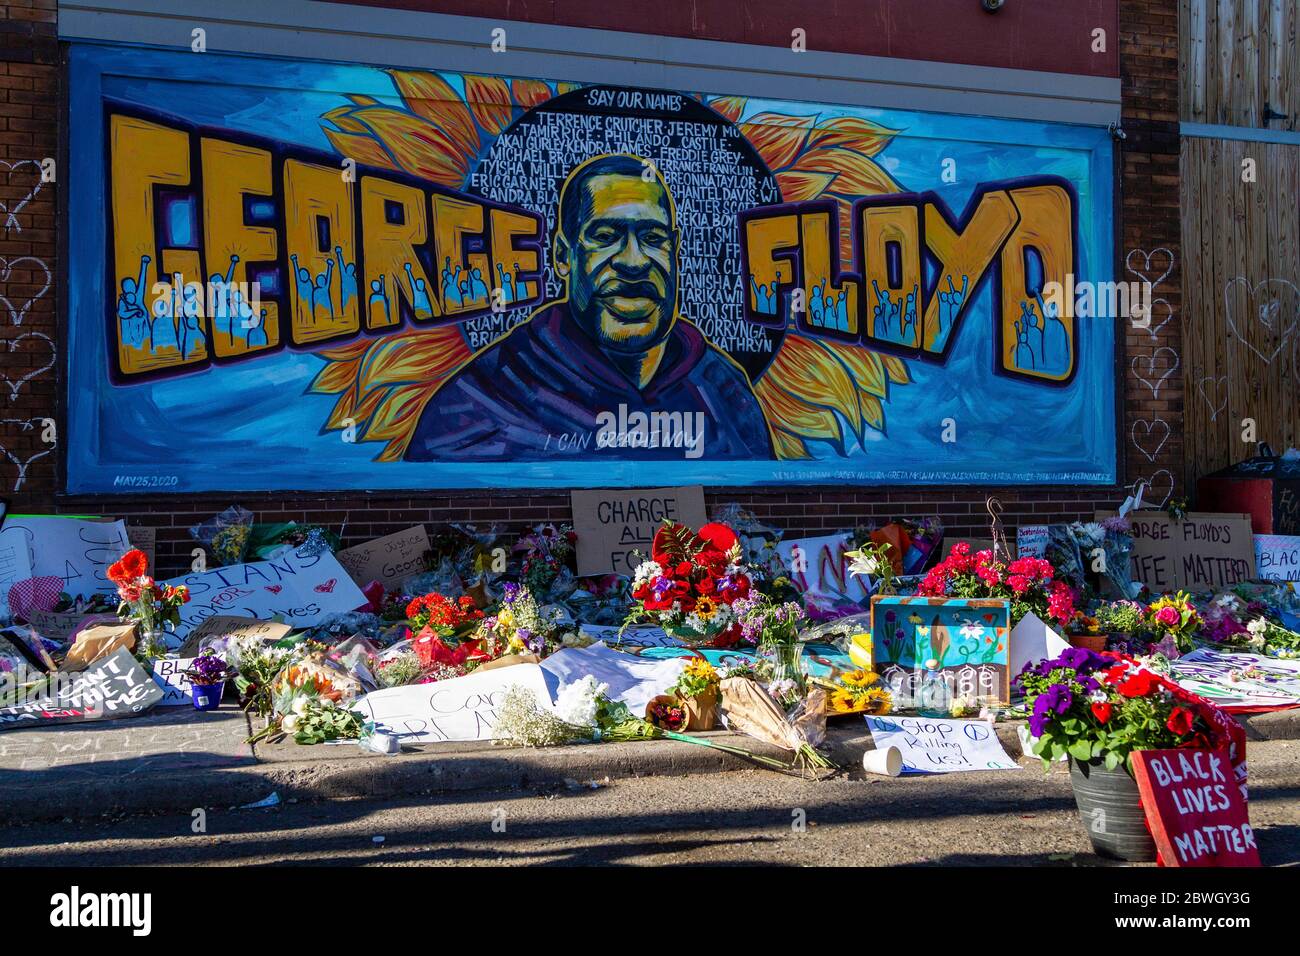 Minneapolis, United States. 30th May, 2020. Minneapolis, MN - May 30, 2020: George Floyd memorial site at the aftermath scene of the George Floyd Black Lives Matter protest and riots on May 30, 2020 in Minneapolis, Minnesota. Credit: Jake Handegard/The Photo Access Credit: The Photo Access/Alamy Live News Stock Photo